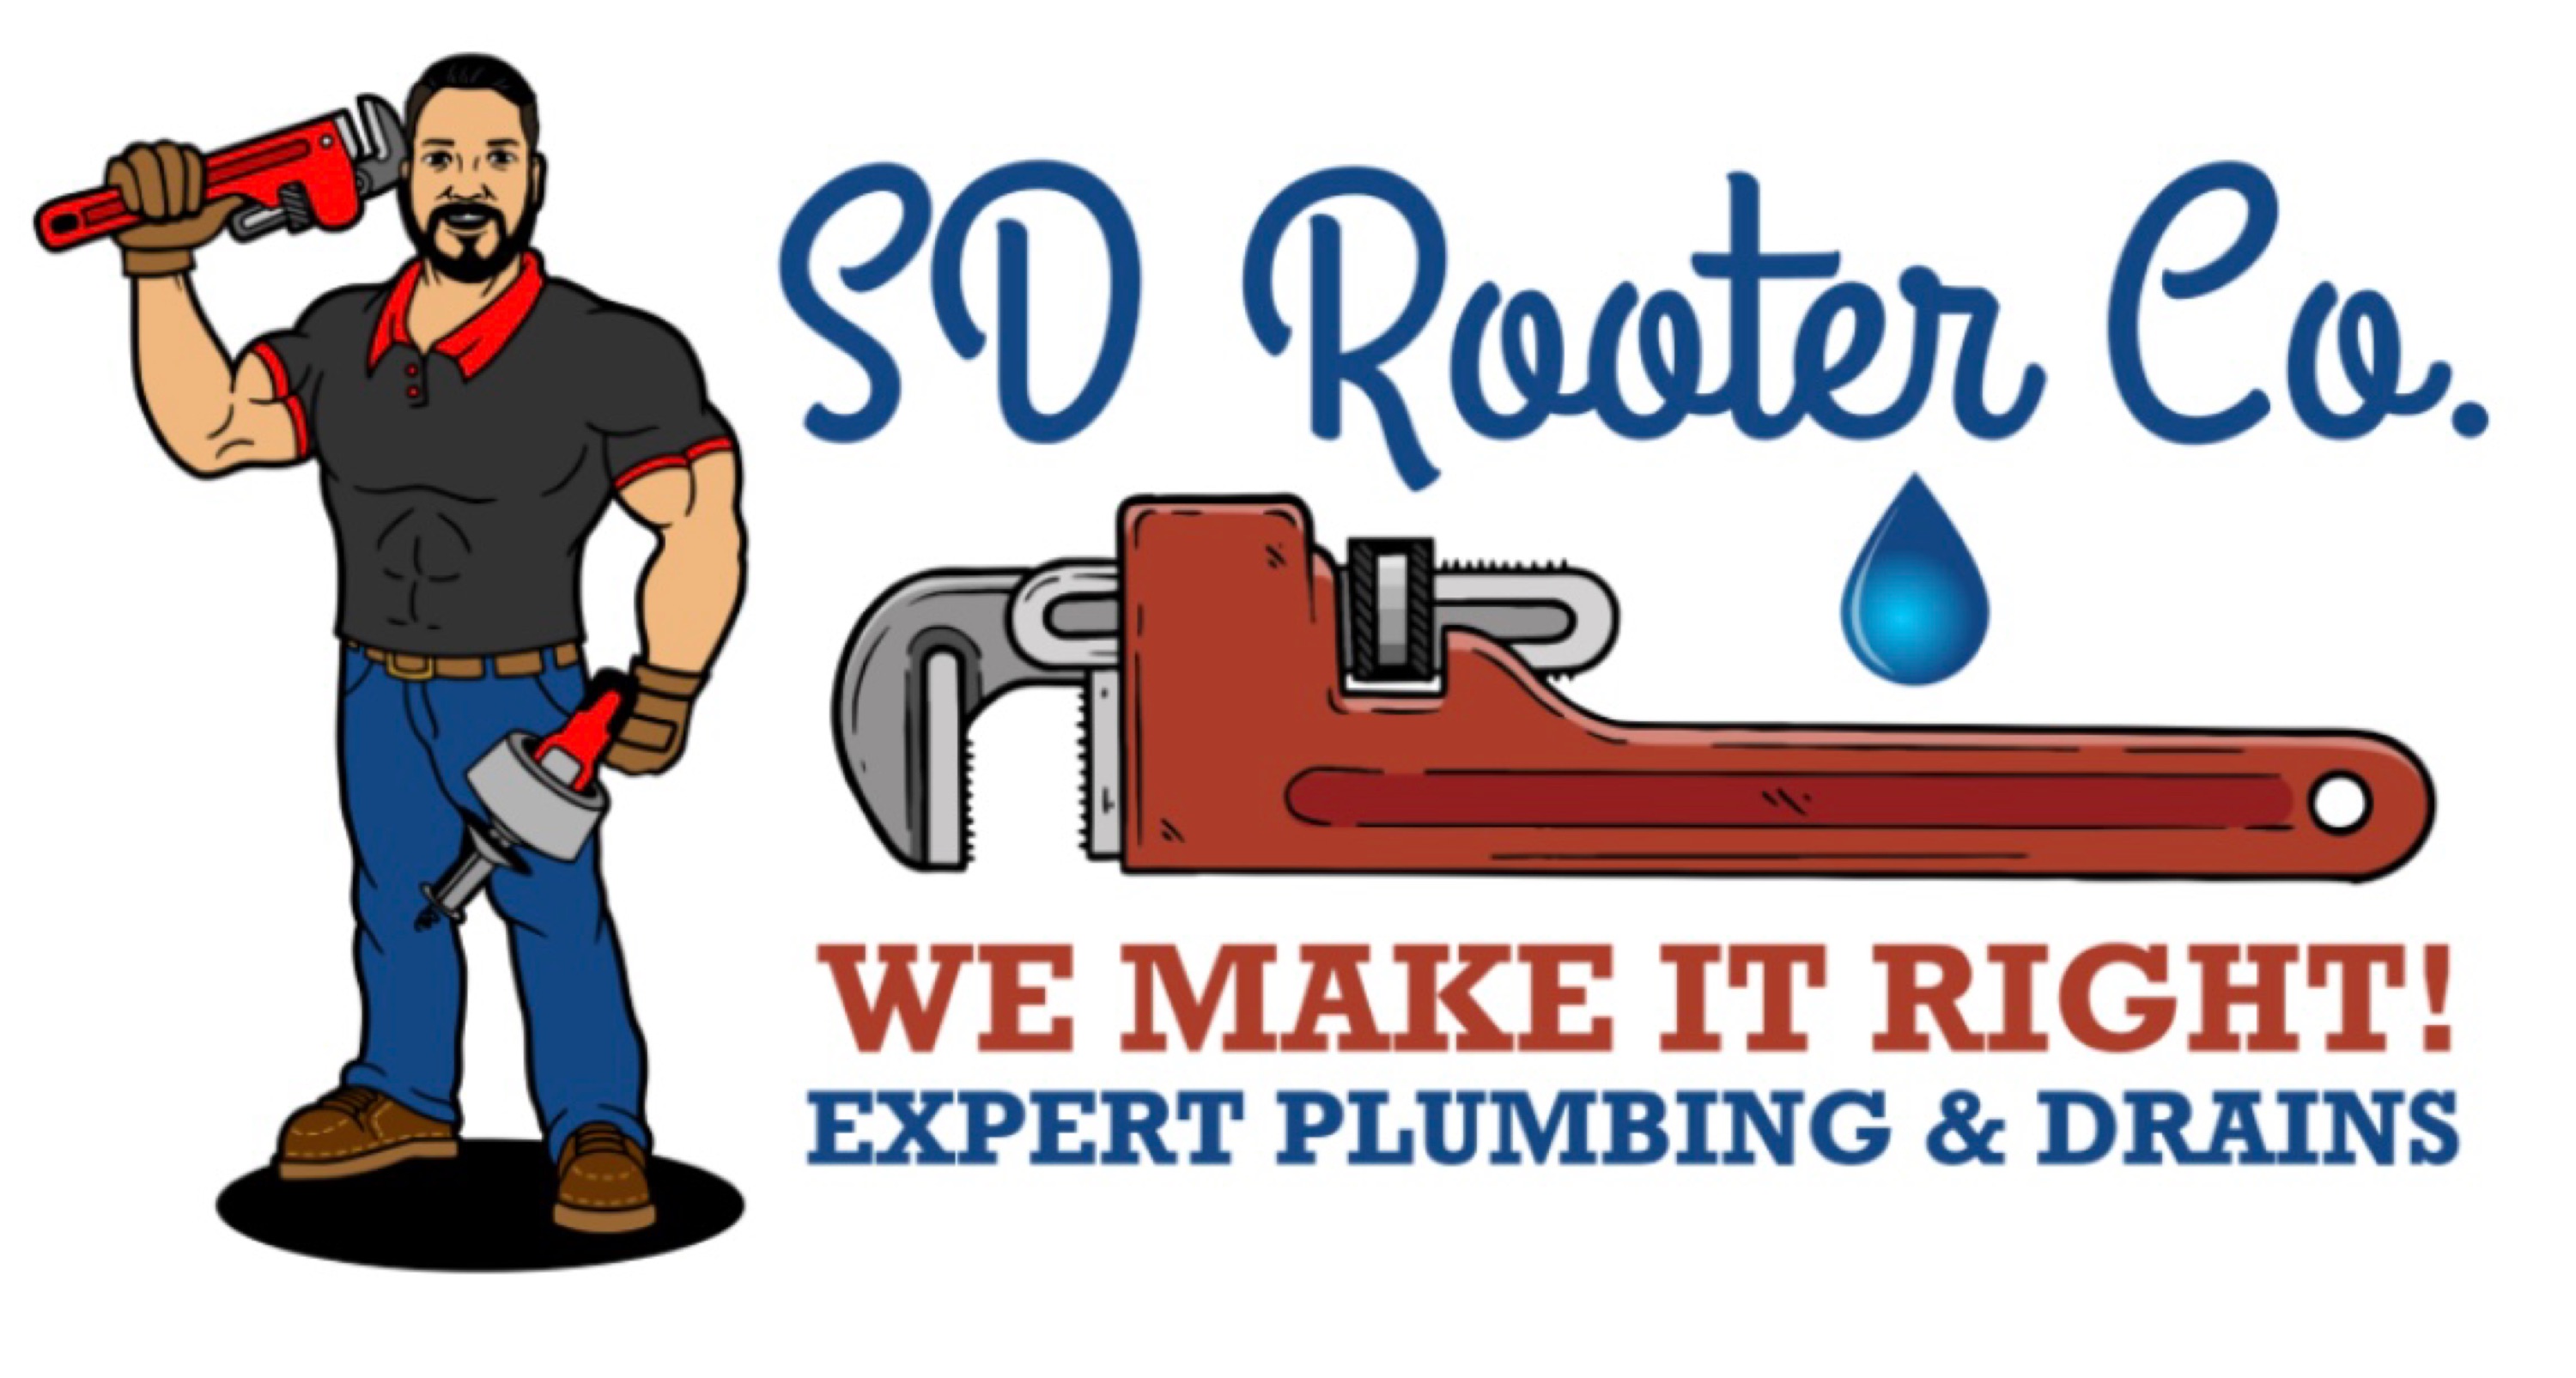 S D Rooter Co. Logo